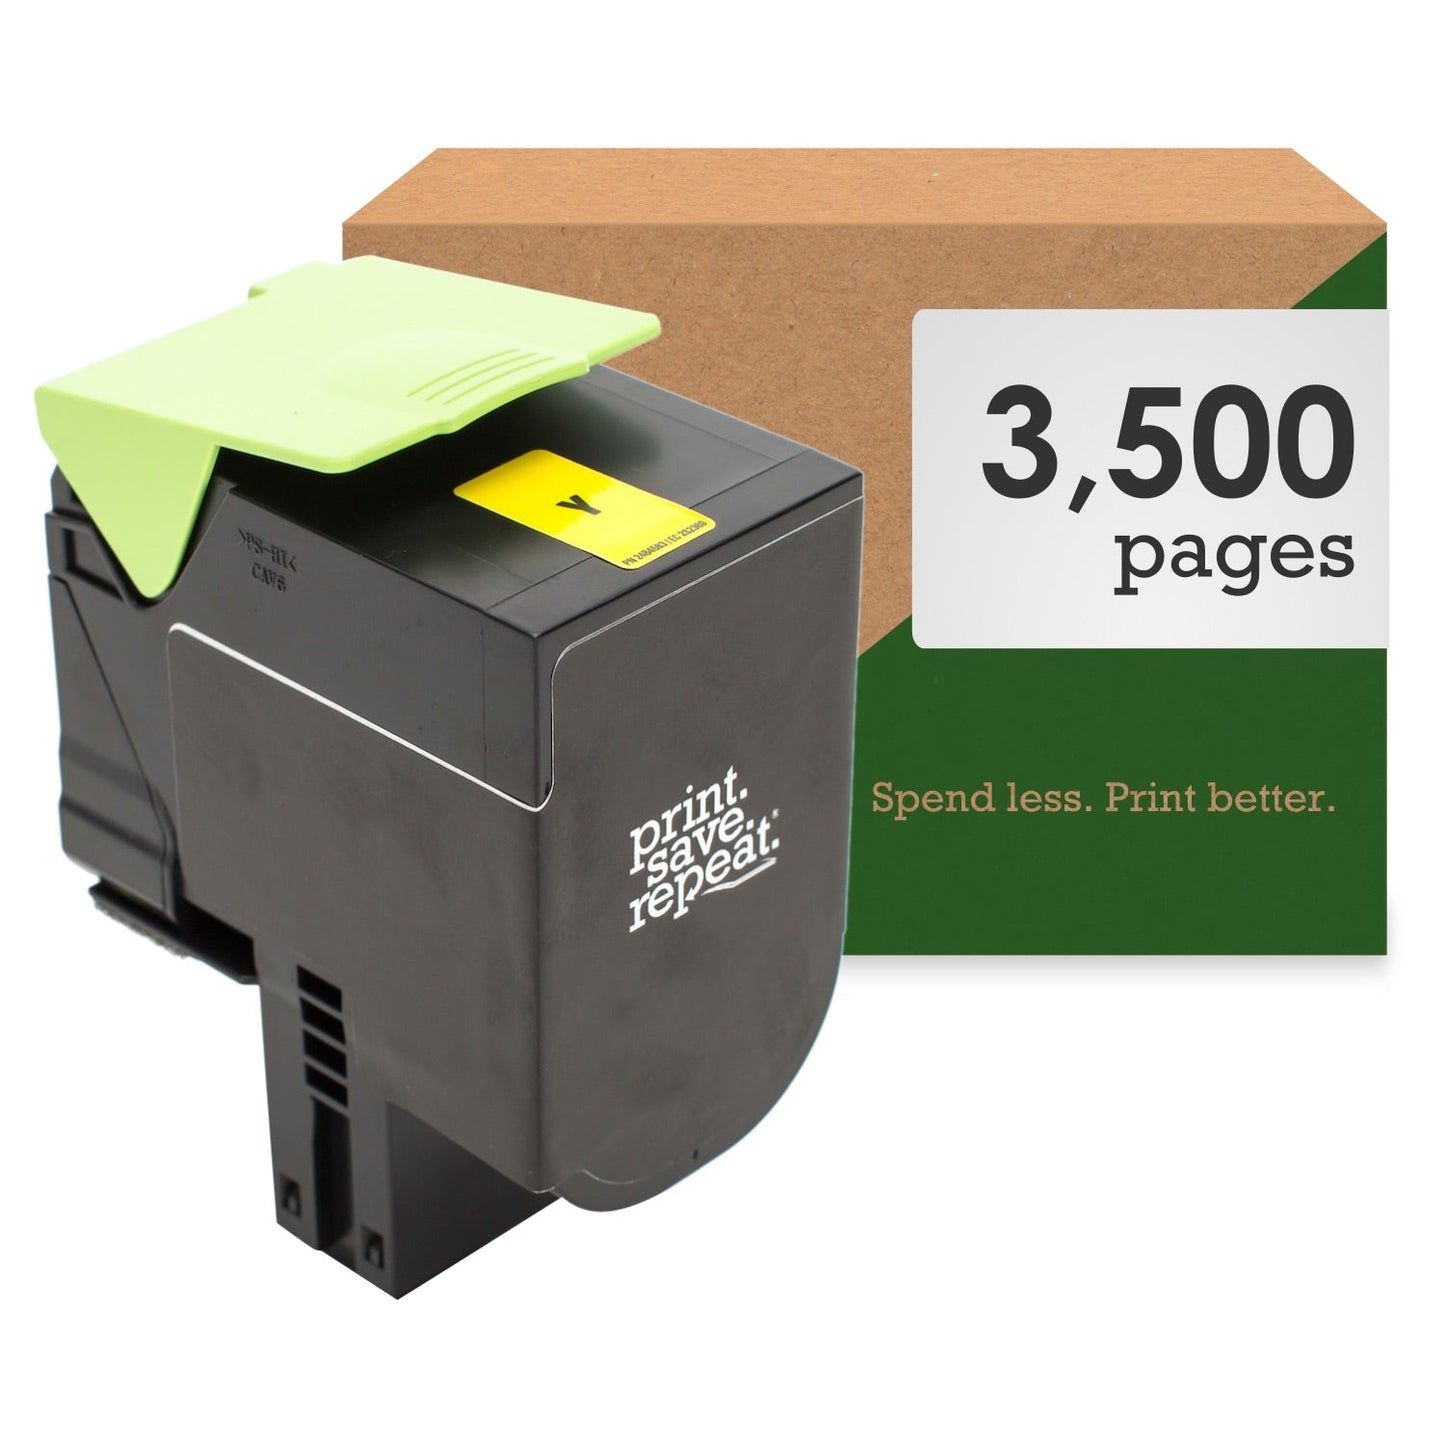 Print.Save.Repeat. Lexmark 71B0H40 Yellow High Yield Remanufactured Toner Cartridge for CS417, CS517, CX417, CX517 [3,500 Pages]